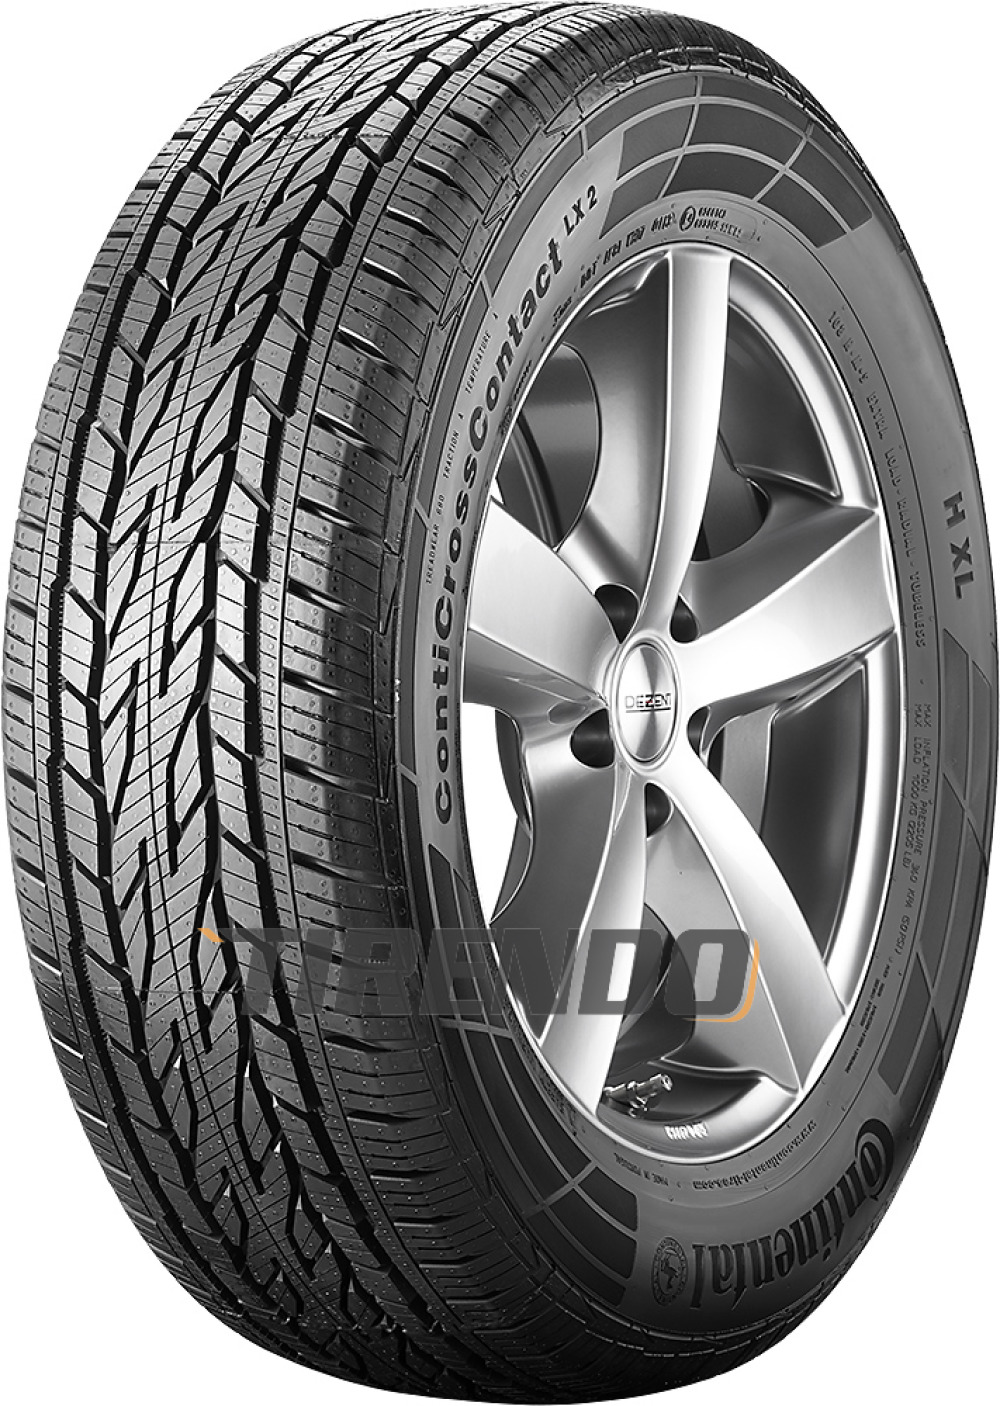 Continental CROSSCONTACT LX 2 235/65R17 108H